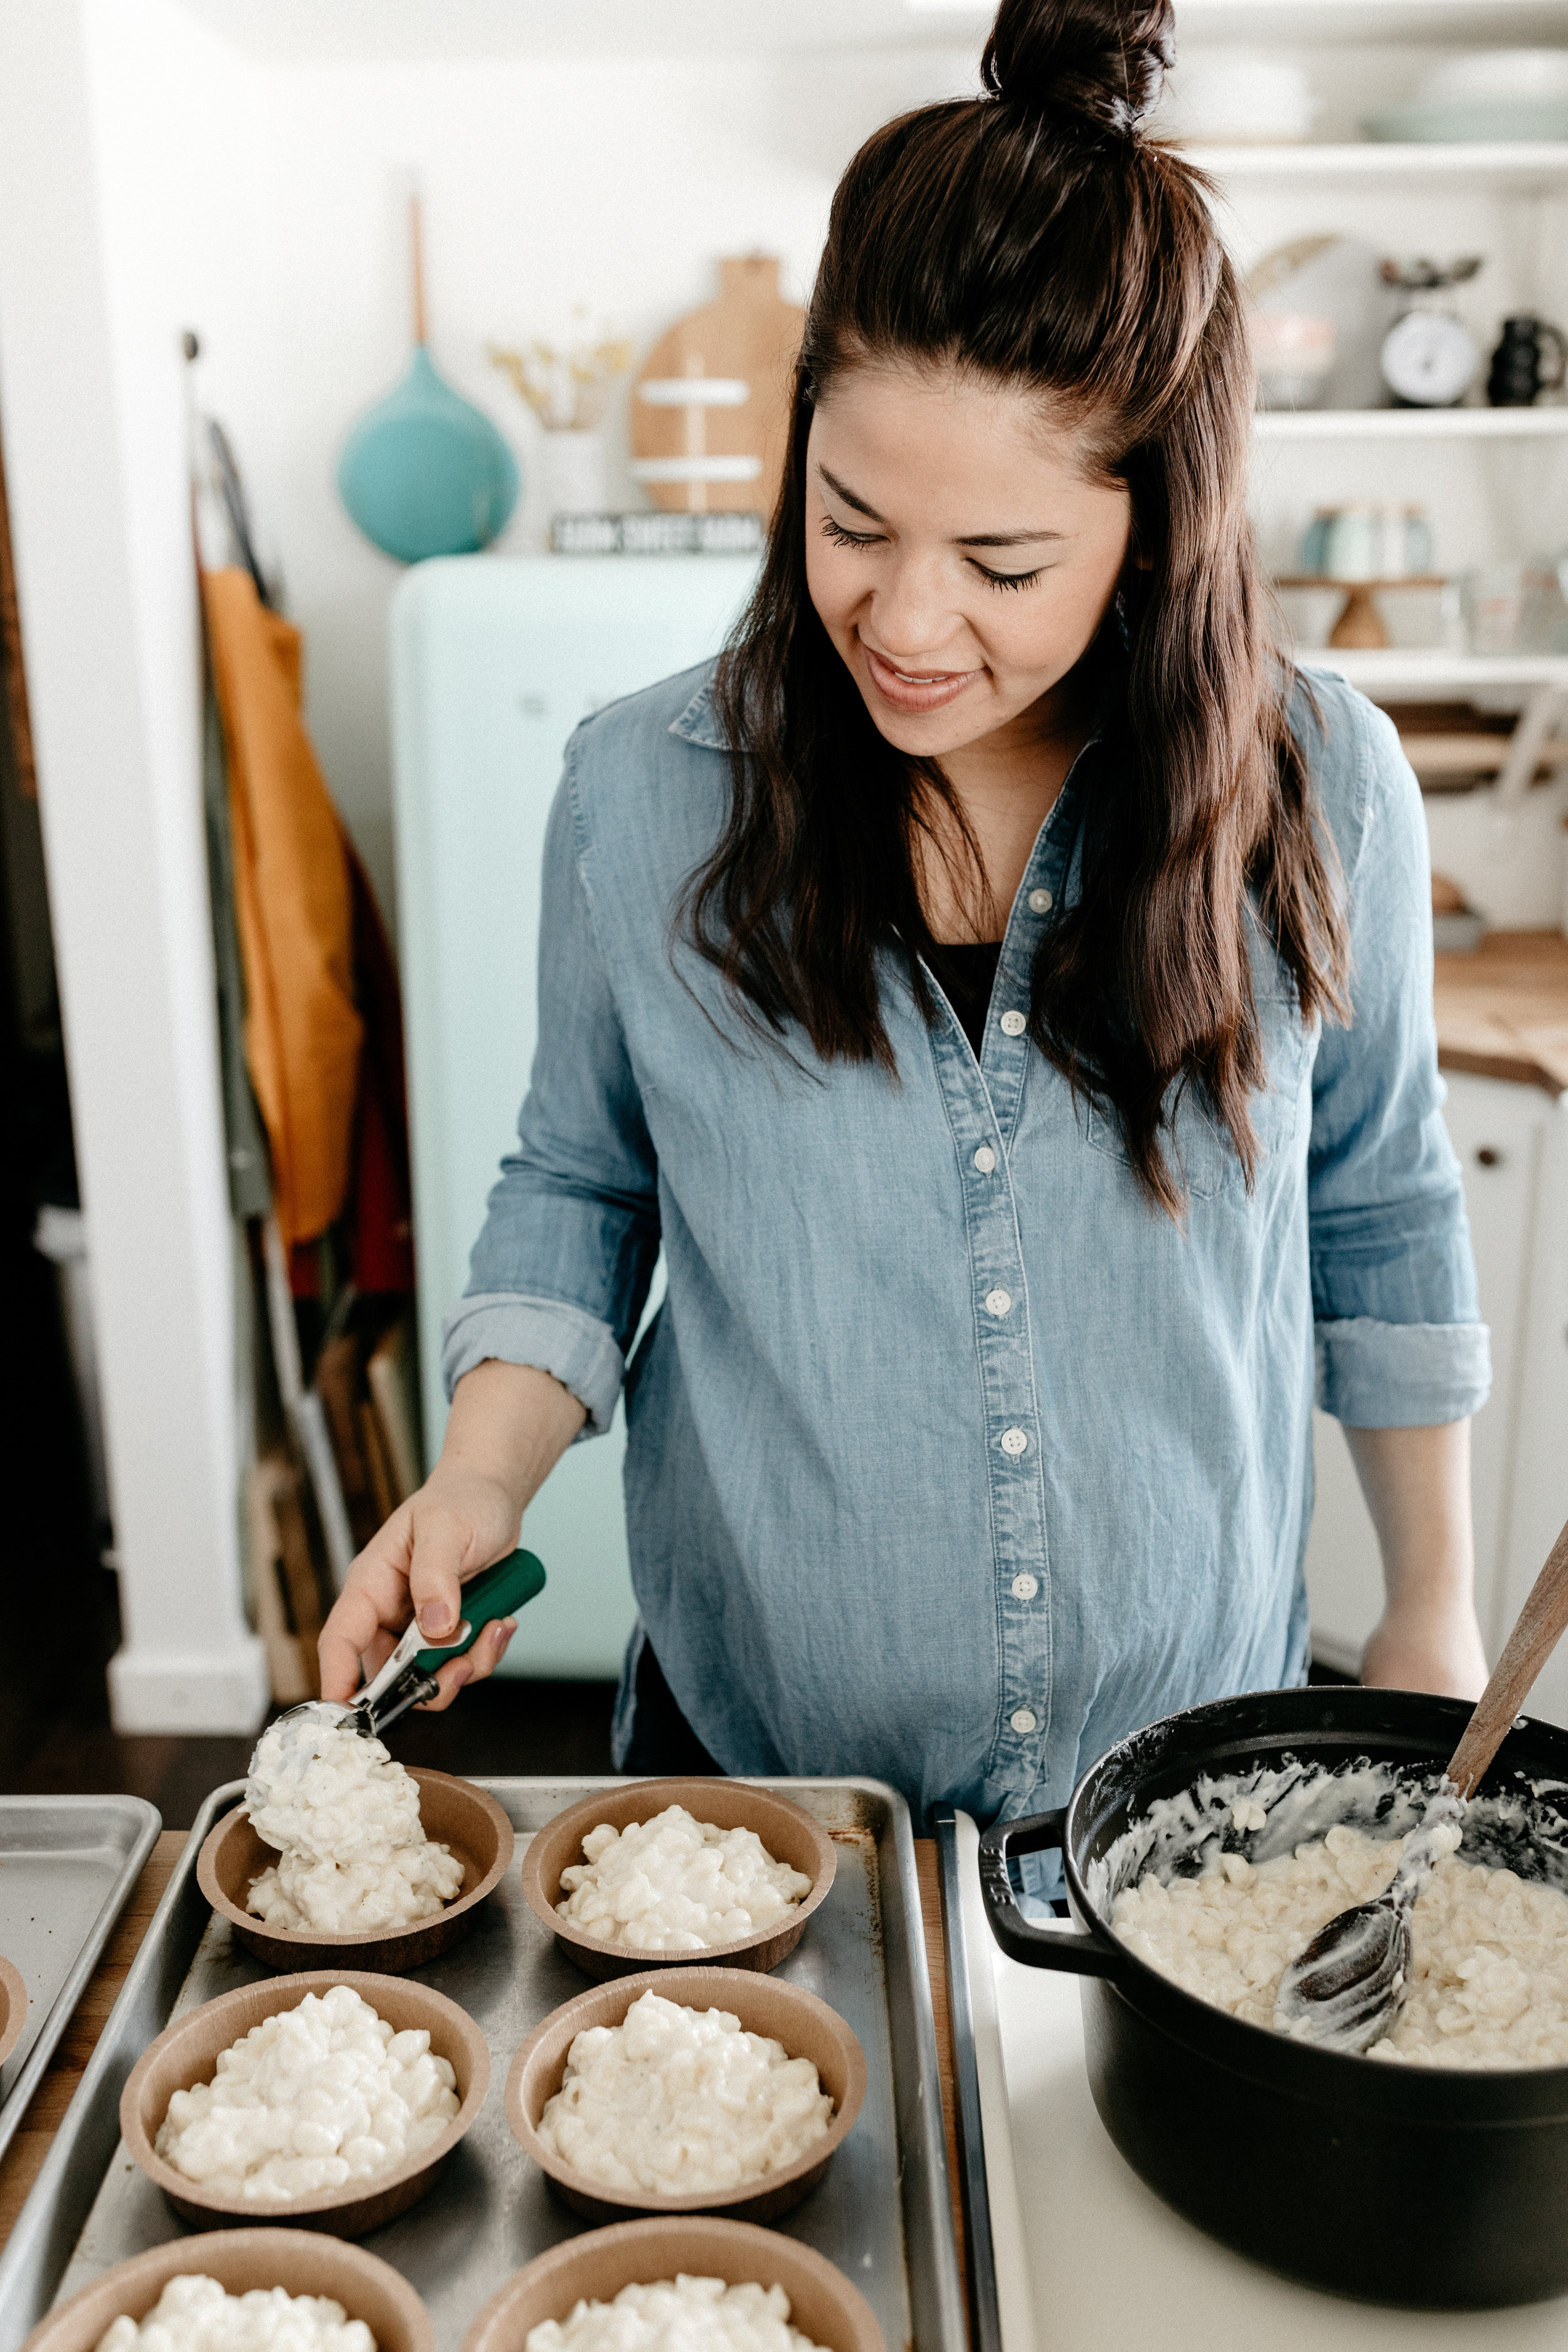 3-6-19-molly-yeh-mac-and-cheese-our-family-9.jpg